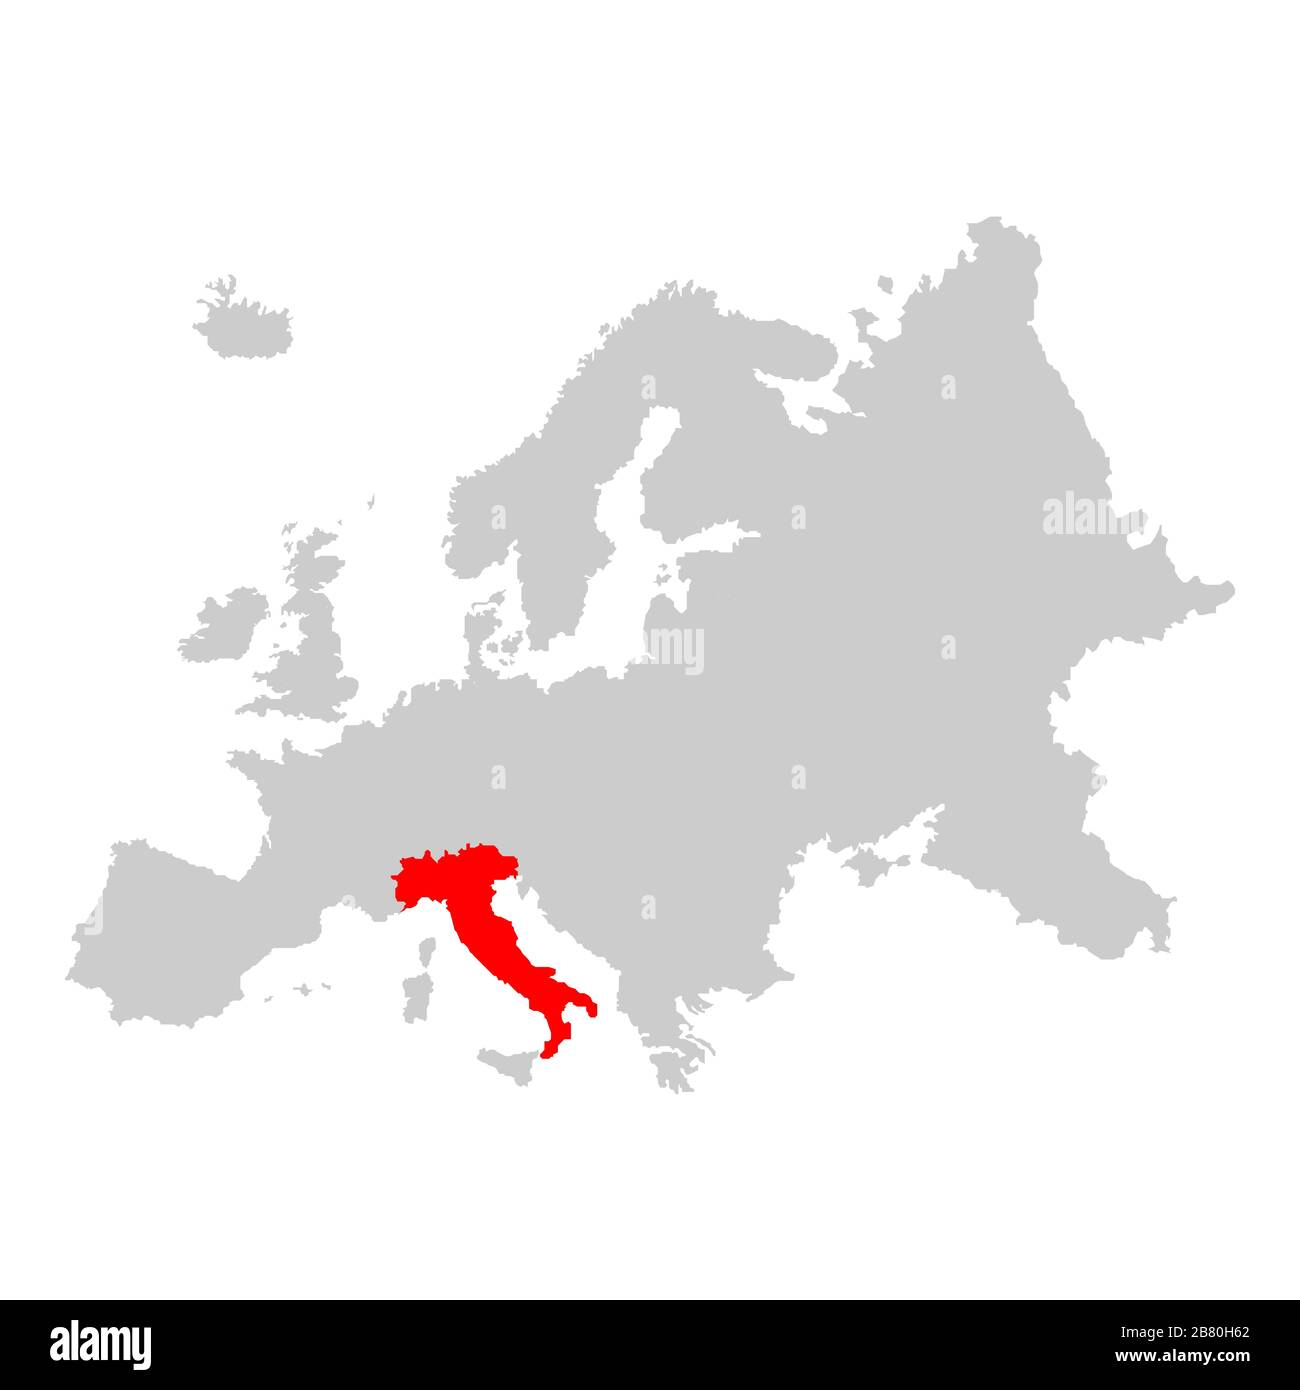 Italy on map of europe Stock Vector